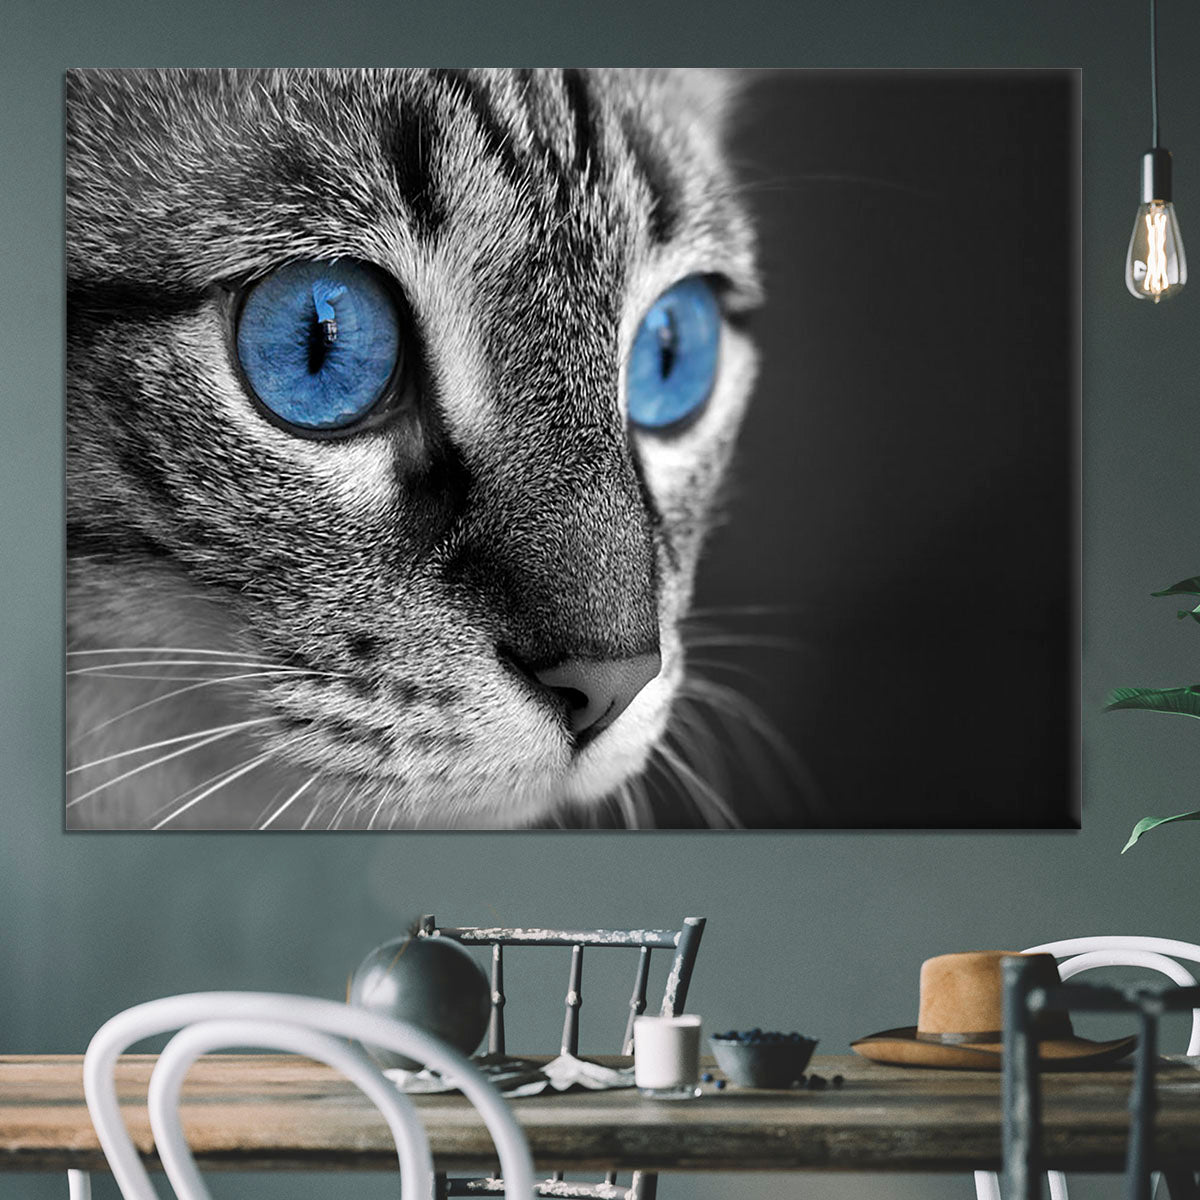 Black and white close up of cat with deep blue eyes Canvas Print or Poster - Canvas Art Rocks - 3